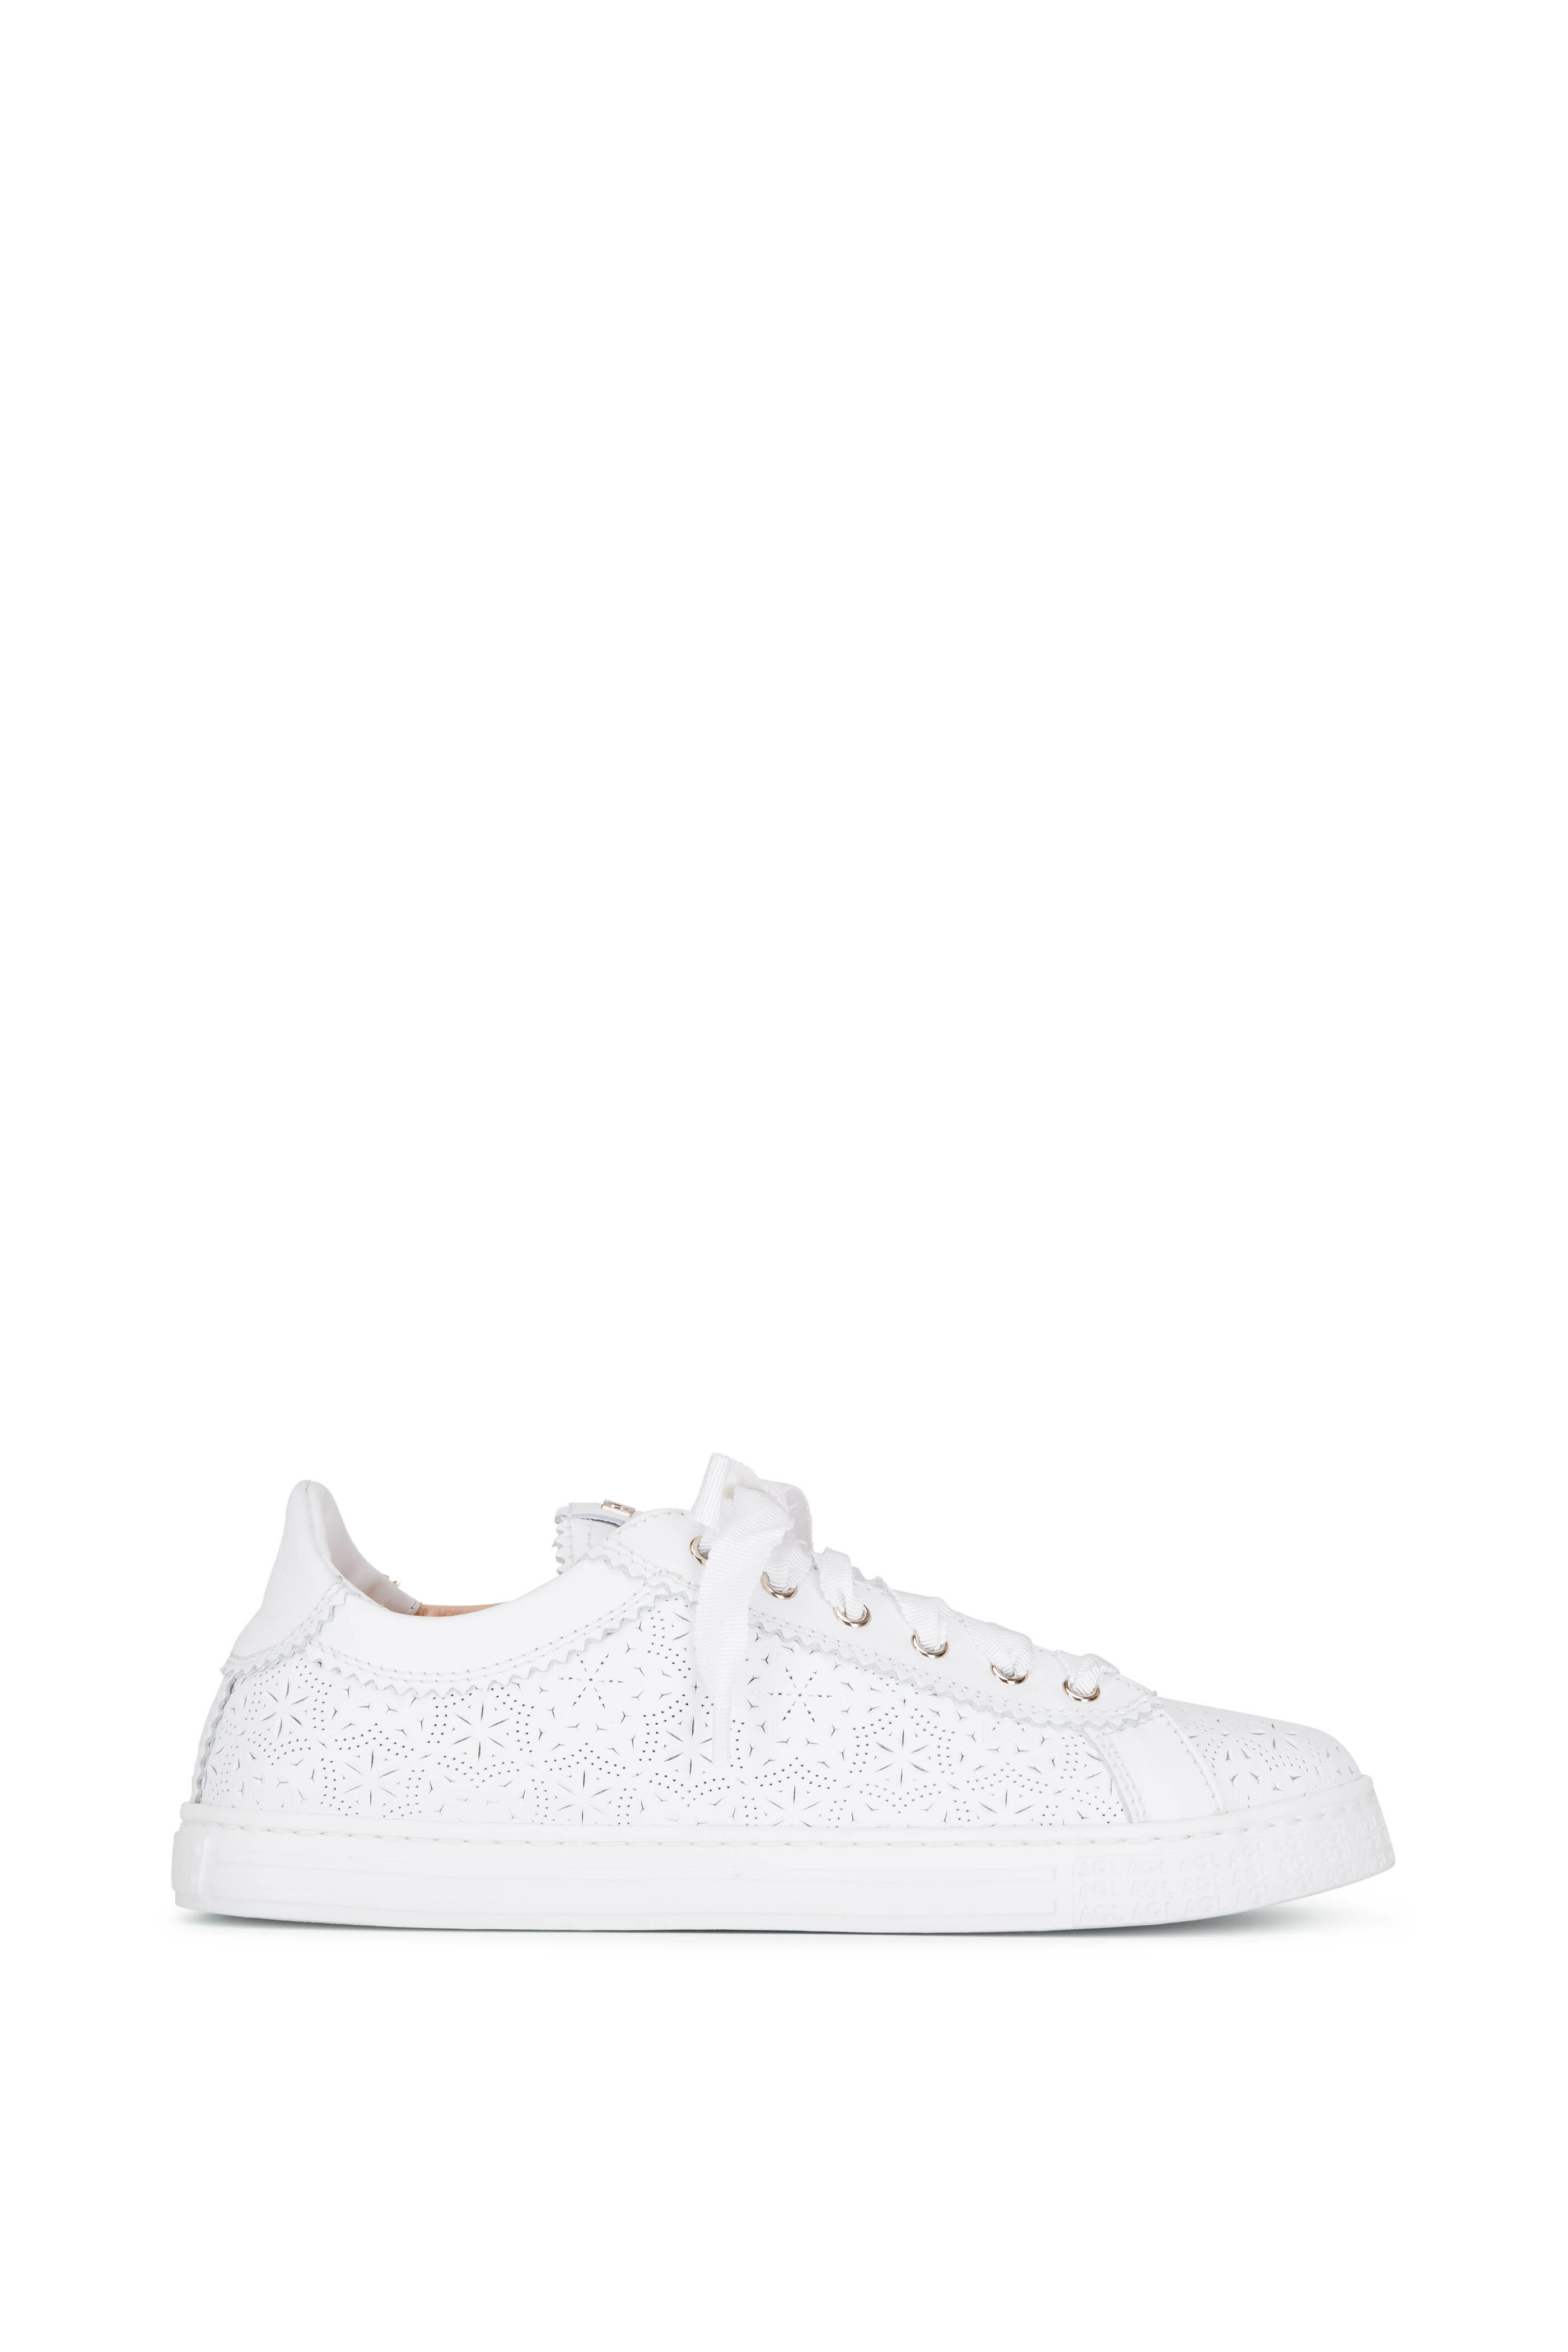 AGL - Sade Spring White Flower Cut Out Sneaker | Mitchell Stores